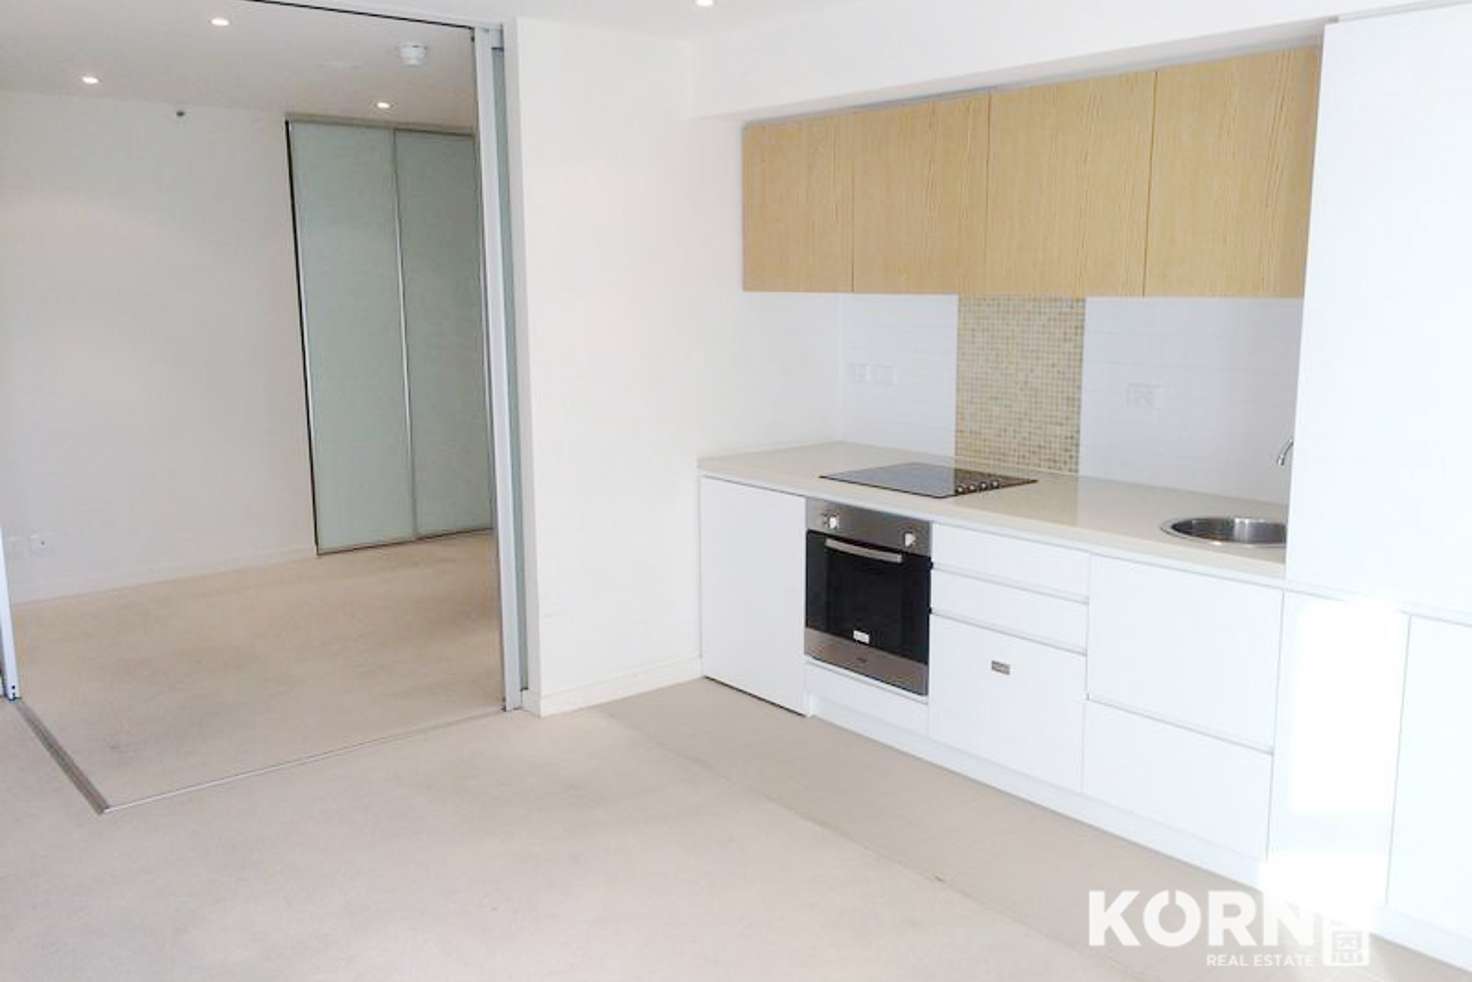 Main view of Homely apartment listing, 608/10 Balfours Way, Adelaide SA 5000